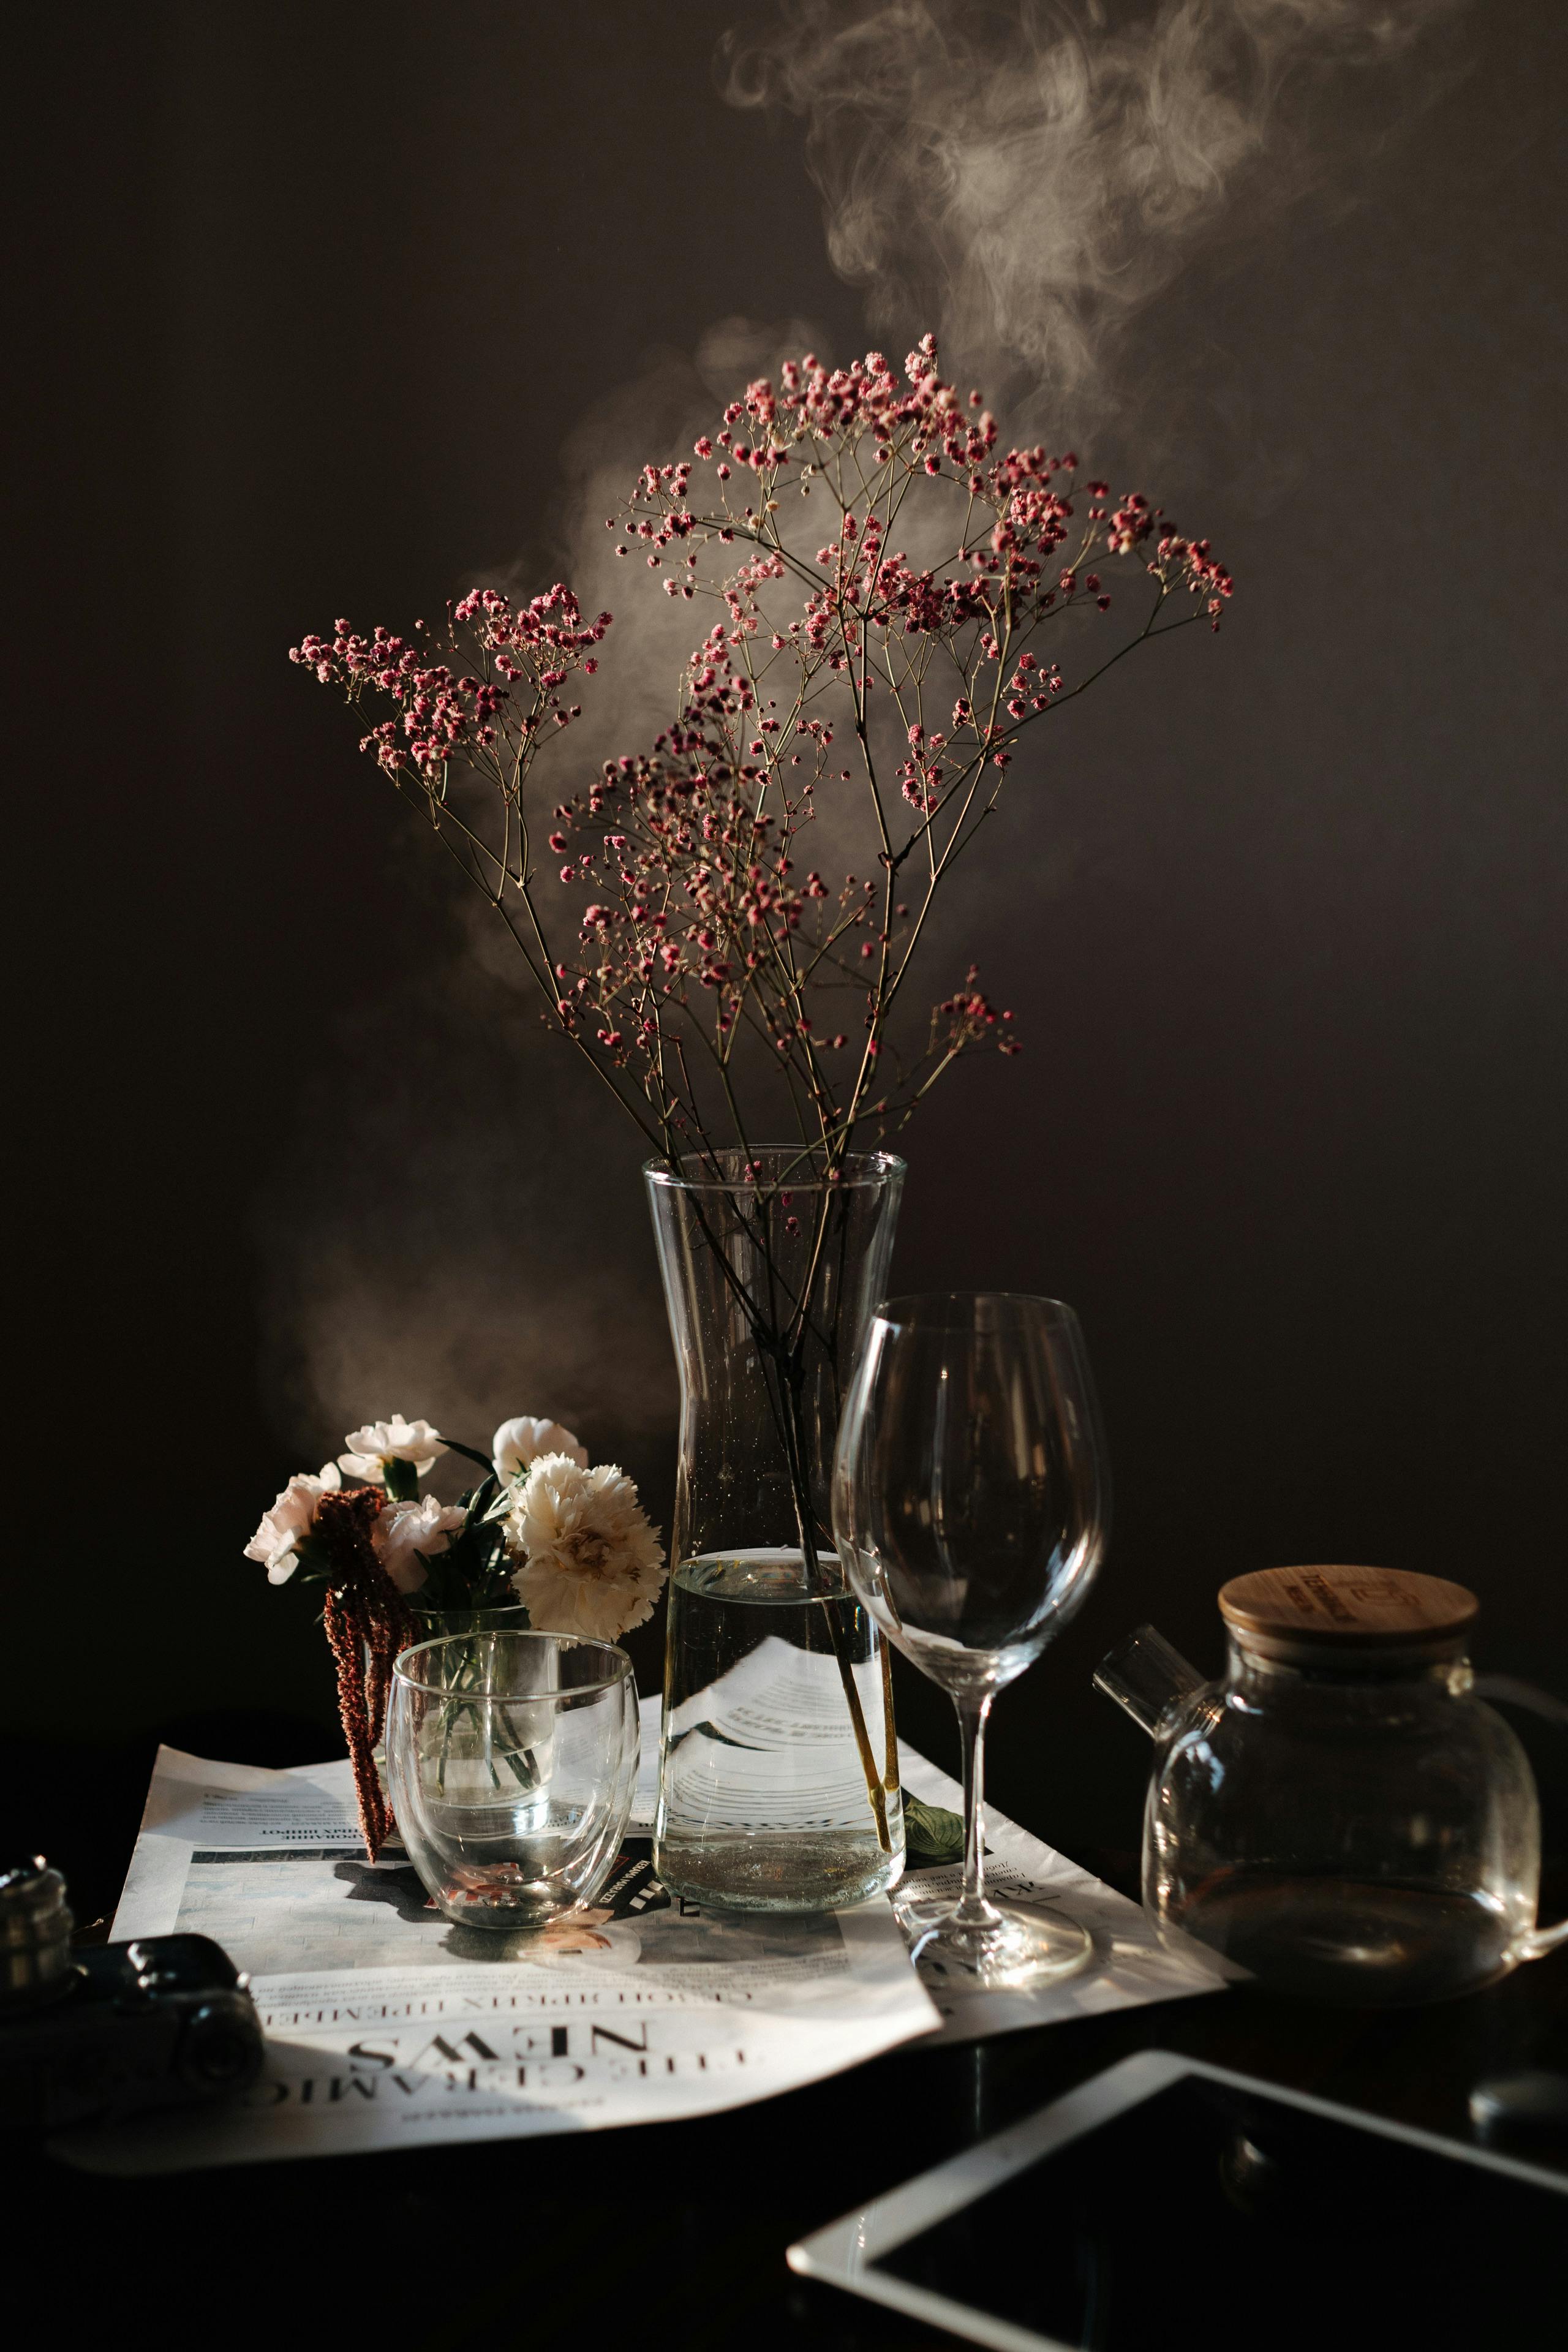 Free Glass Utensils and Cut Flowers in Artistic Arrangement with Smoke in Background Stock Photo